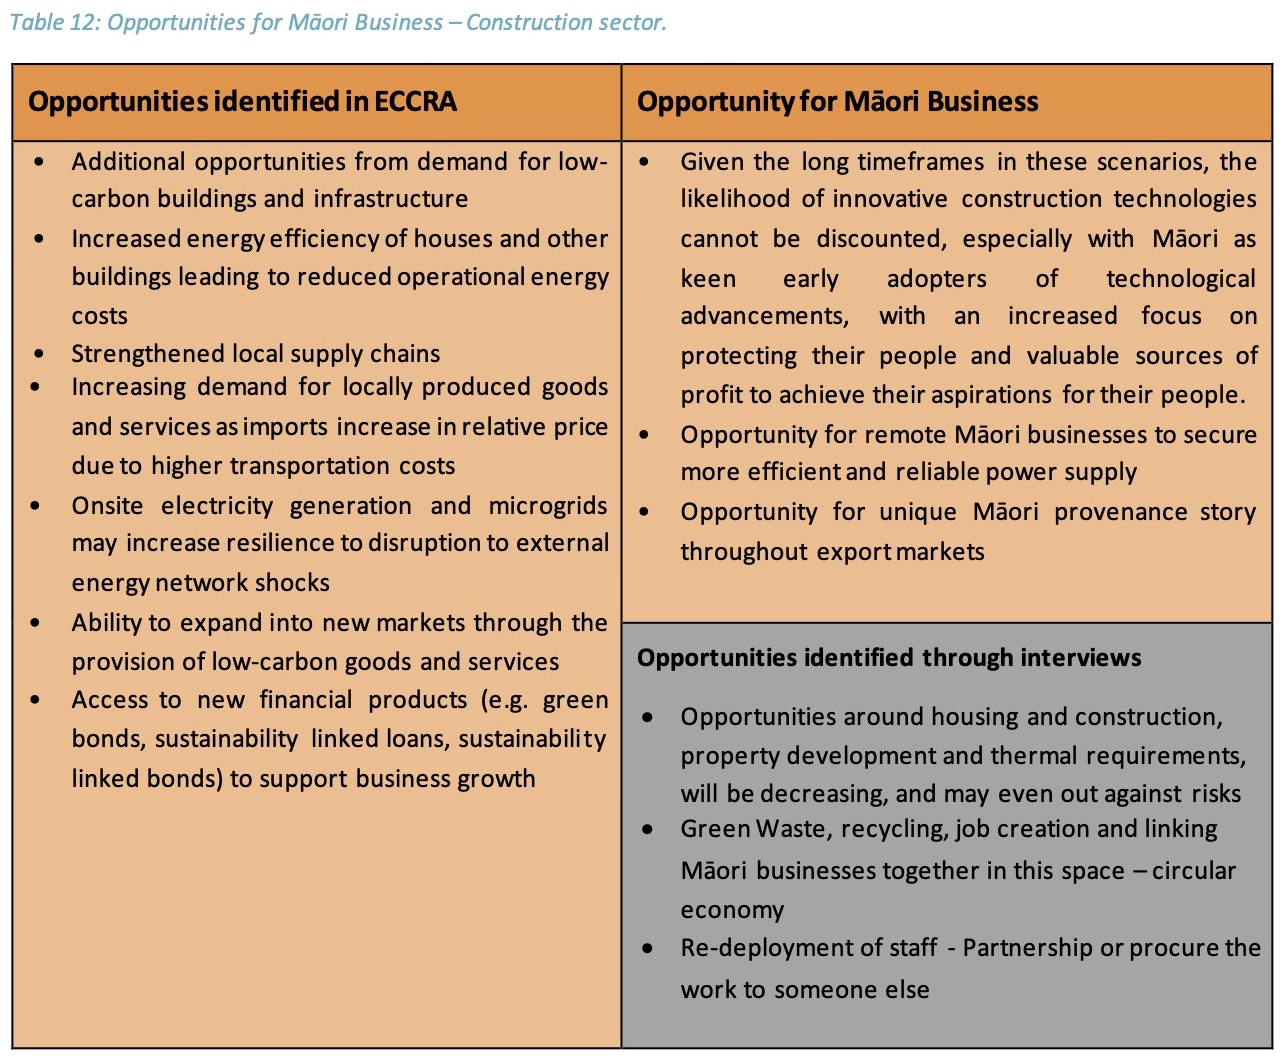 table 12: Māori business opportunities for the construction sector